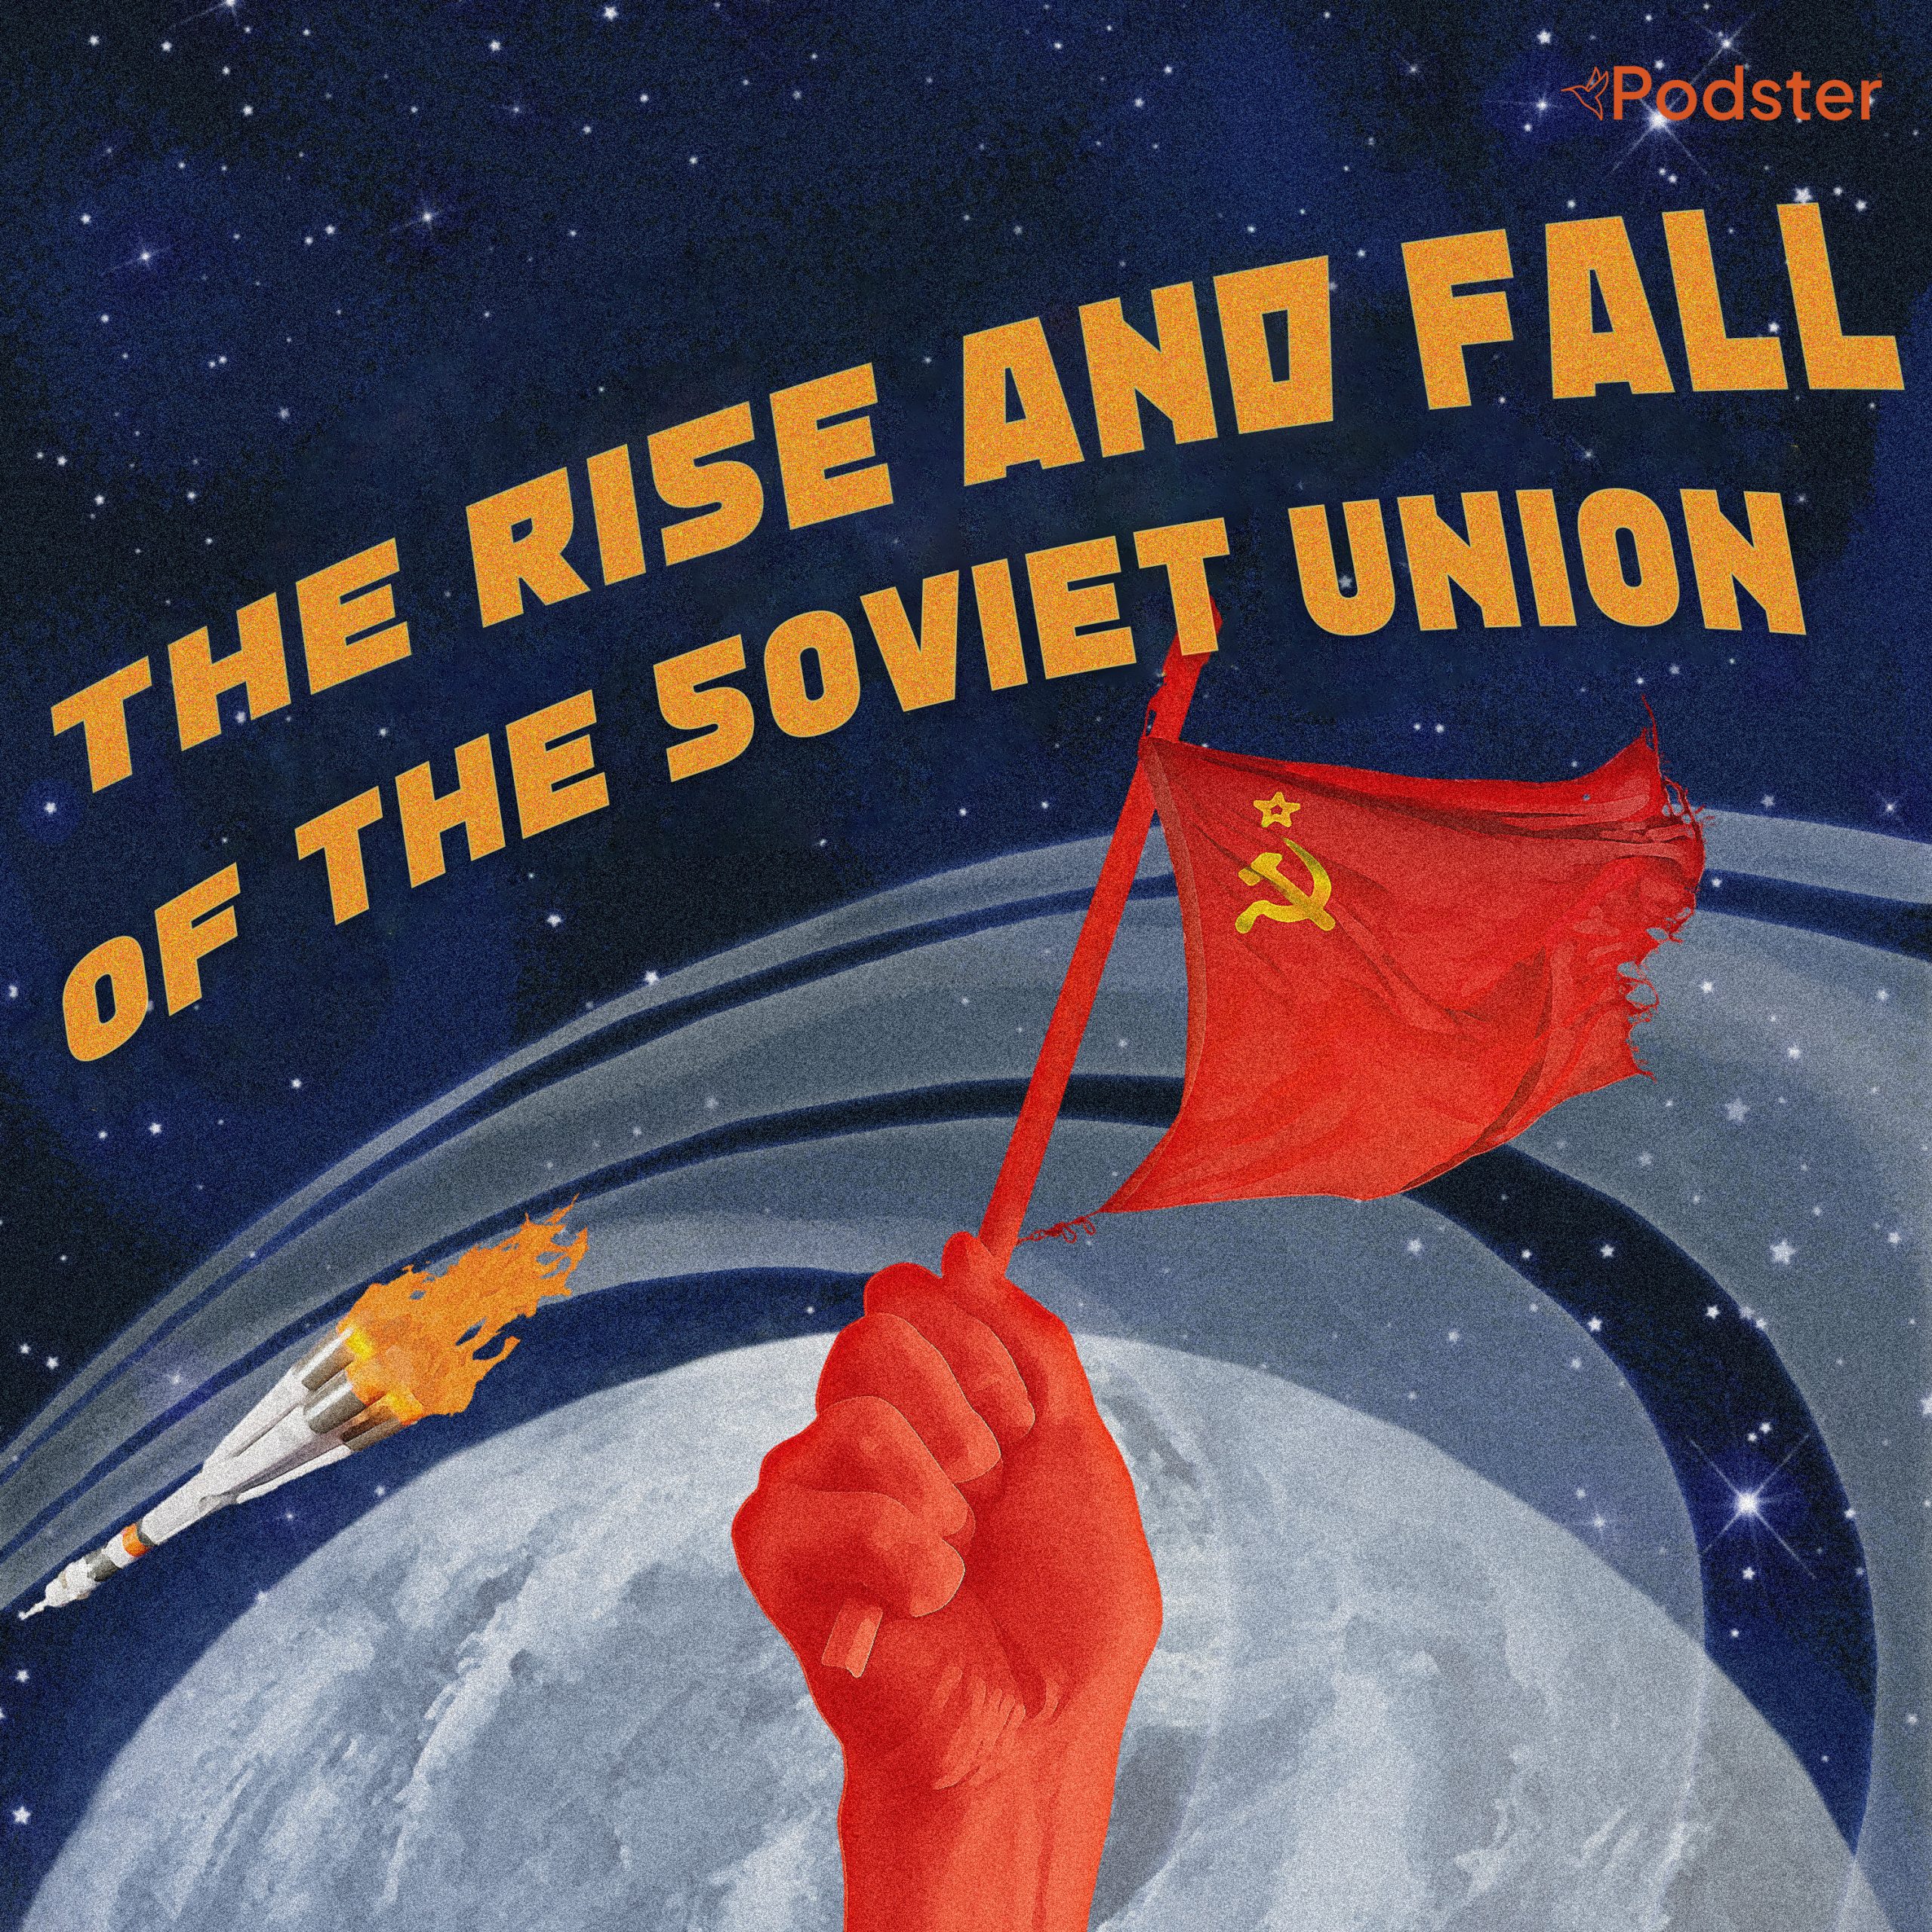 The Rise and Fall of the Soviet Union podcast